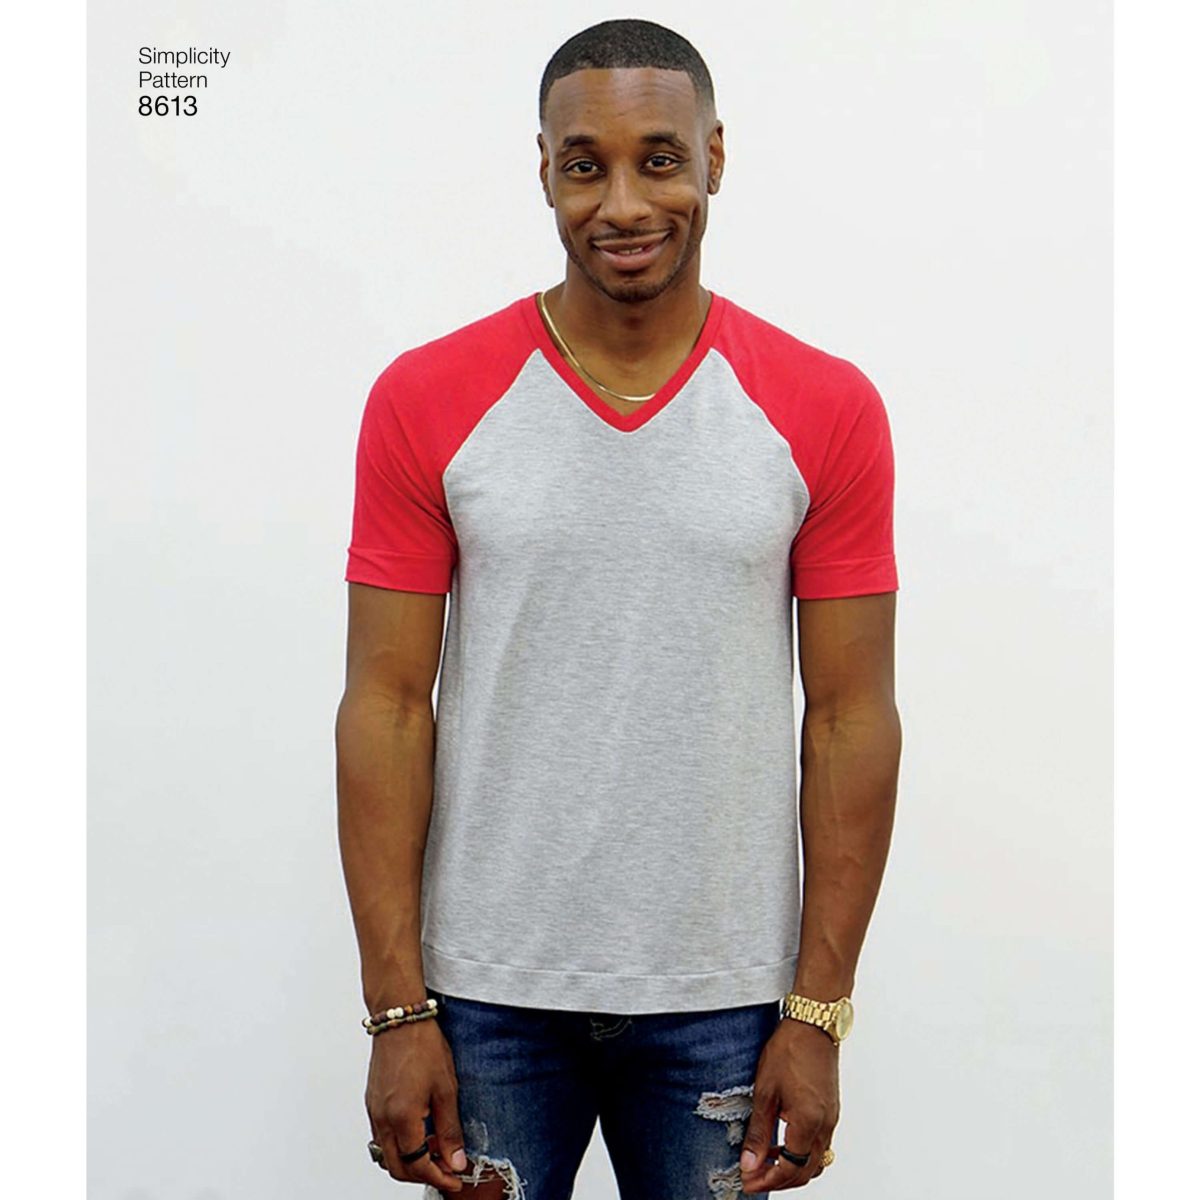 Simplicity Sewing Pattern 8613 Men's Knit Top by Mimi G